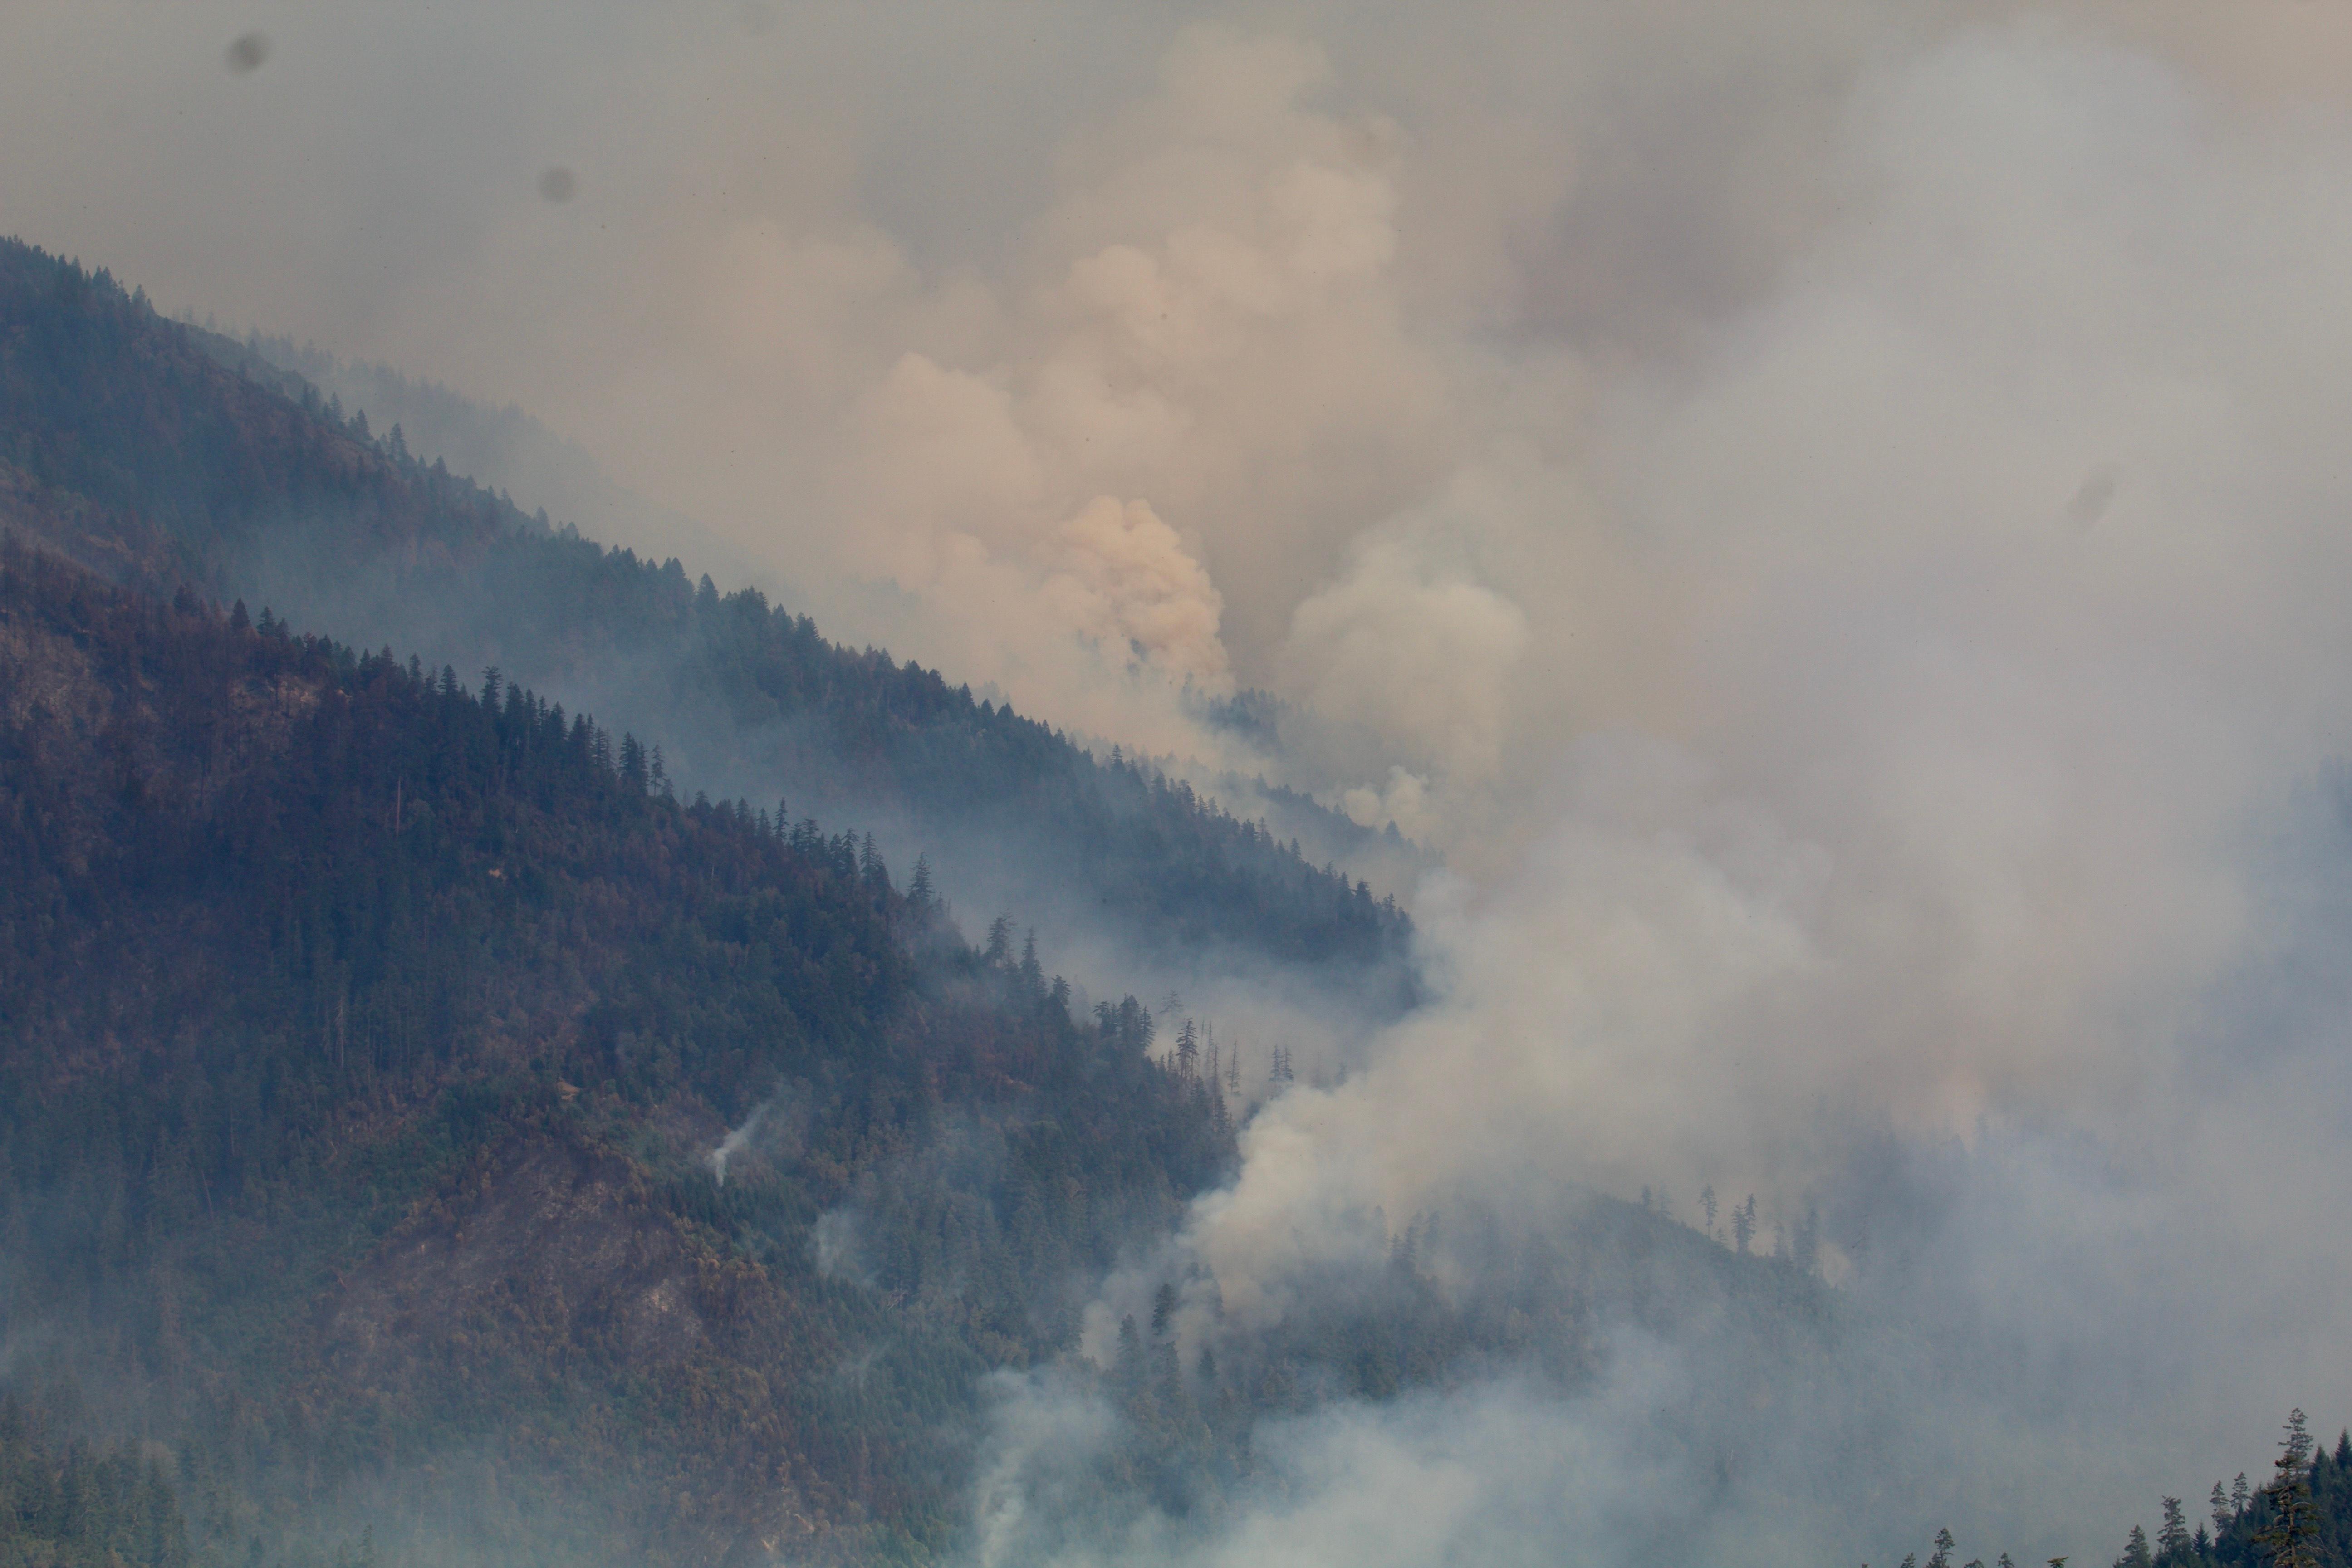 Smoke rises in multiple plumes from a valley surrounded by green hills